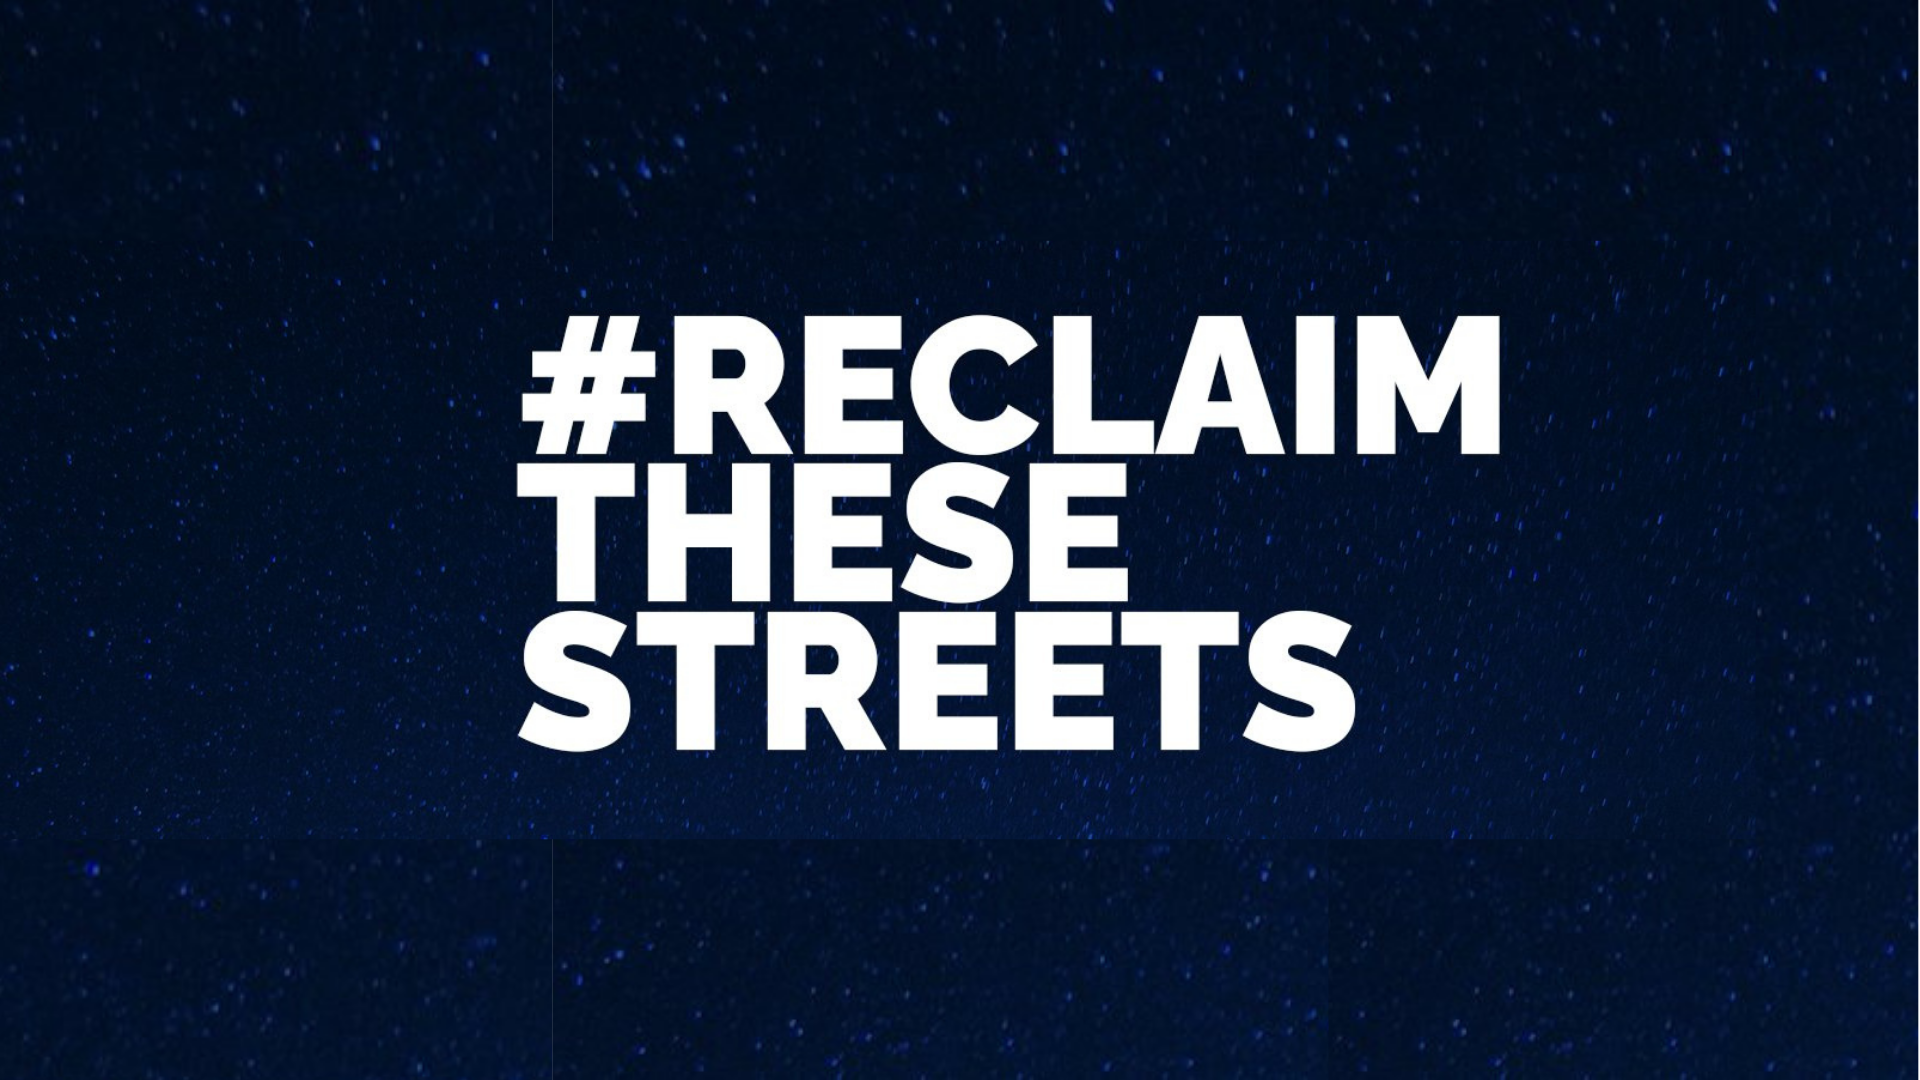 Independent events are springing up all over the country. Image credit: Reclaim These Streets